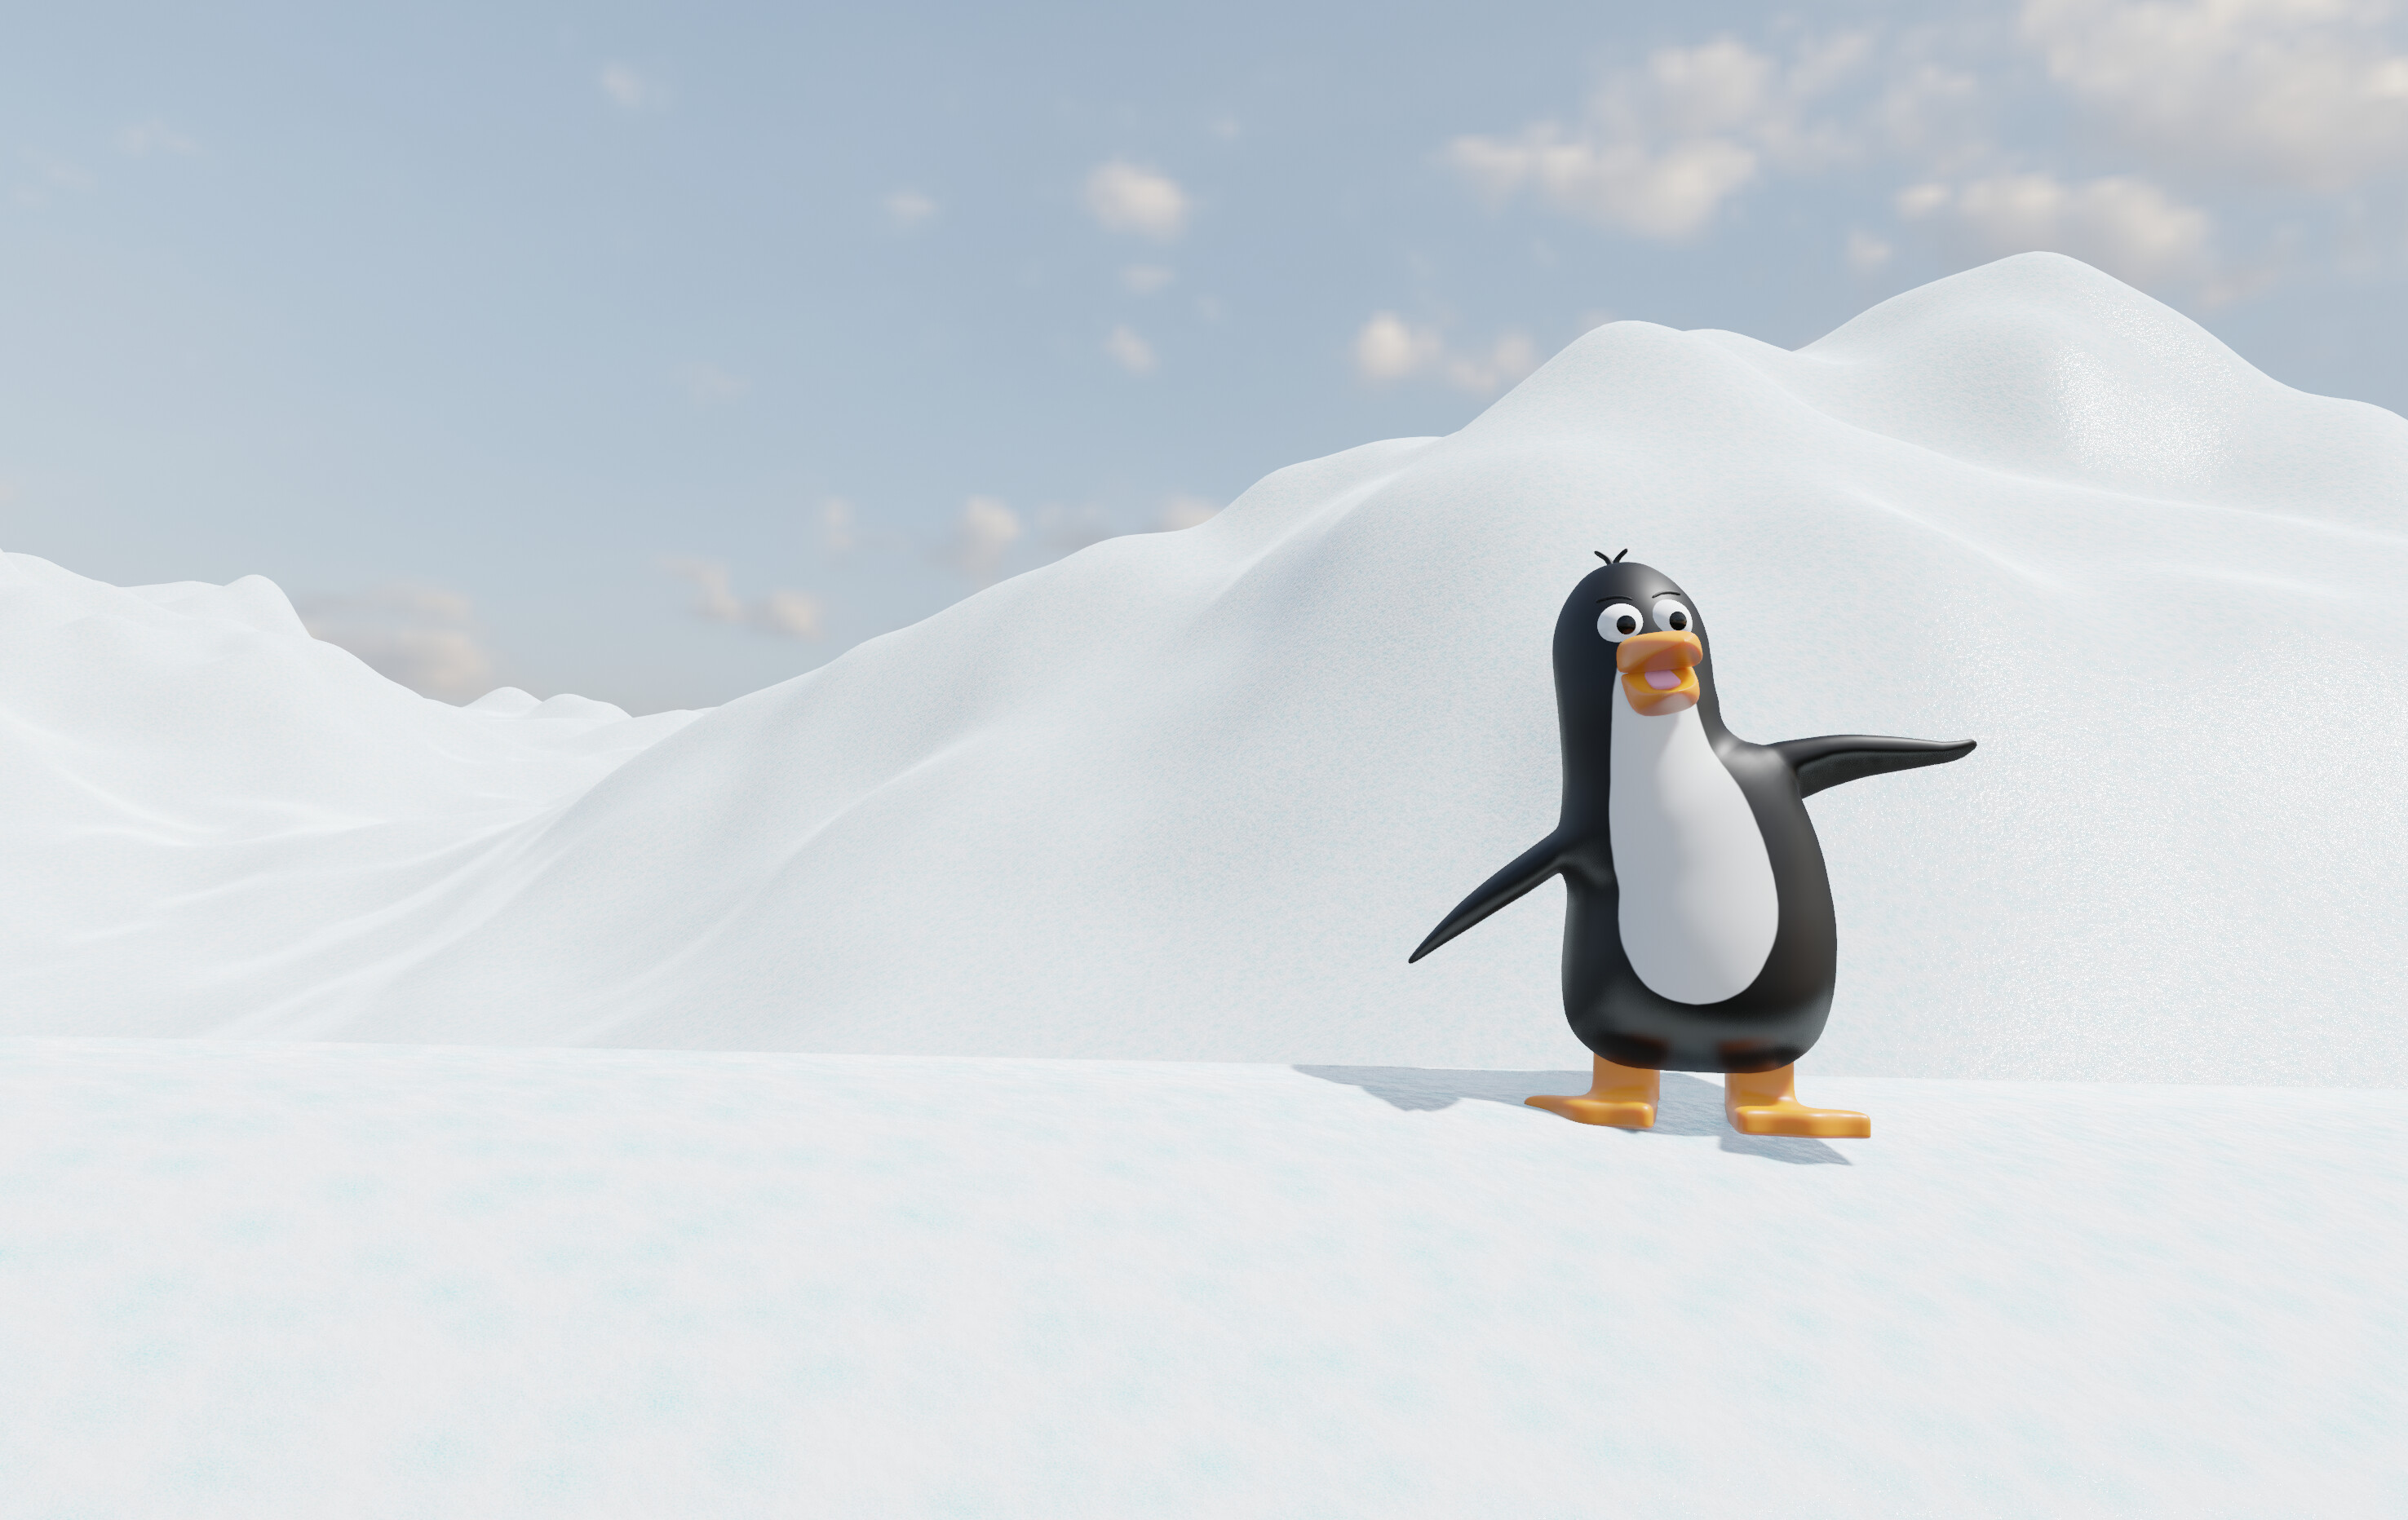 Penguin animation - Finished Projects - Blender Artists Community